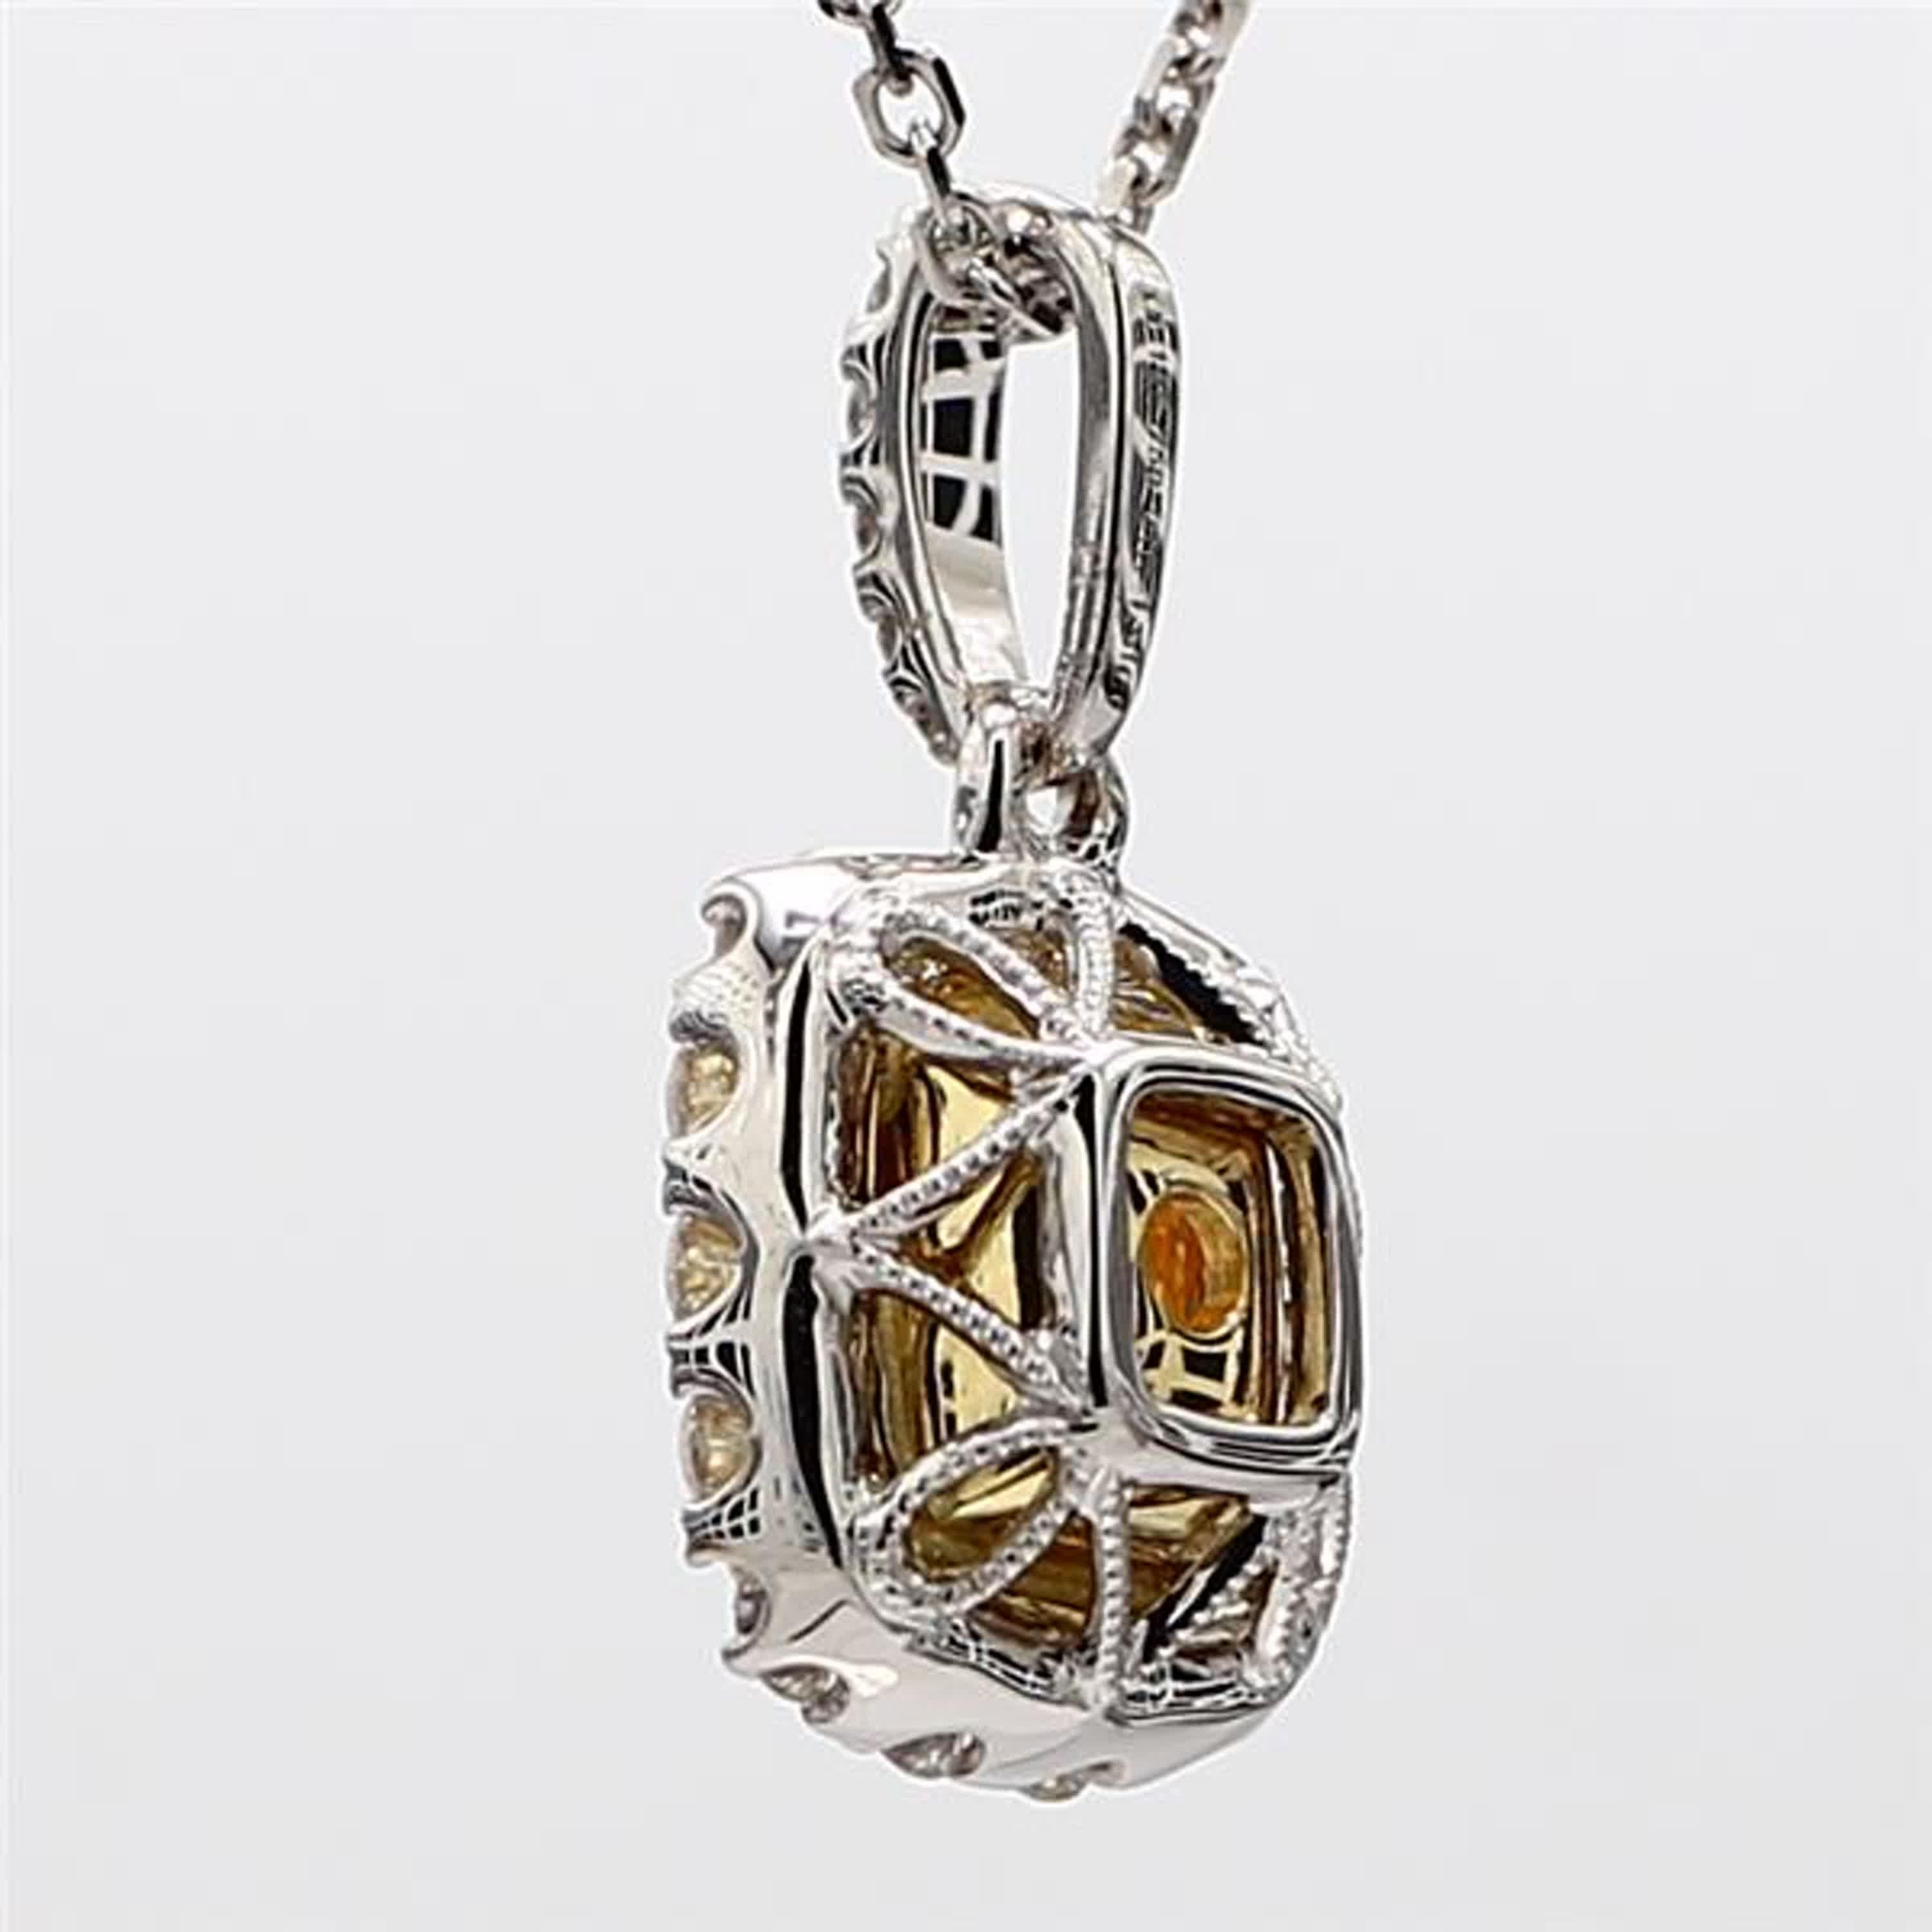 Cushion Cut GIA Certified Natural Yellow Cushion and White Diamond 1.35ct TW Gold Pendant